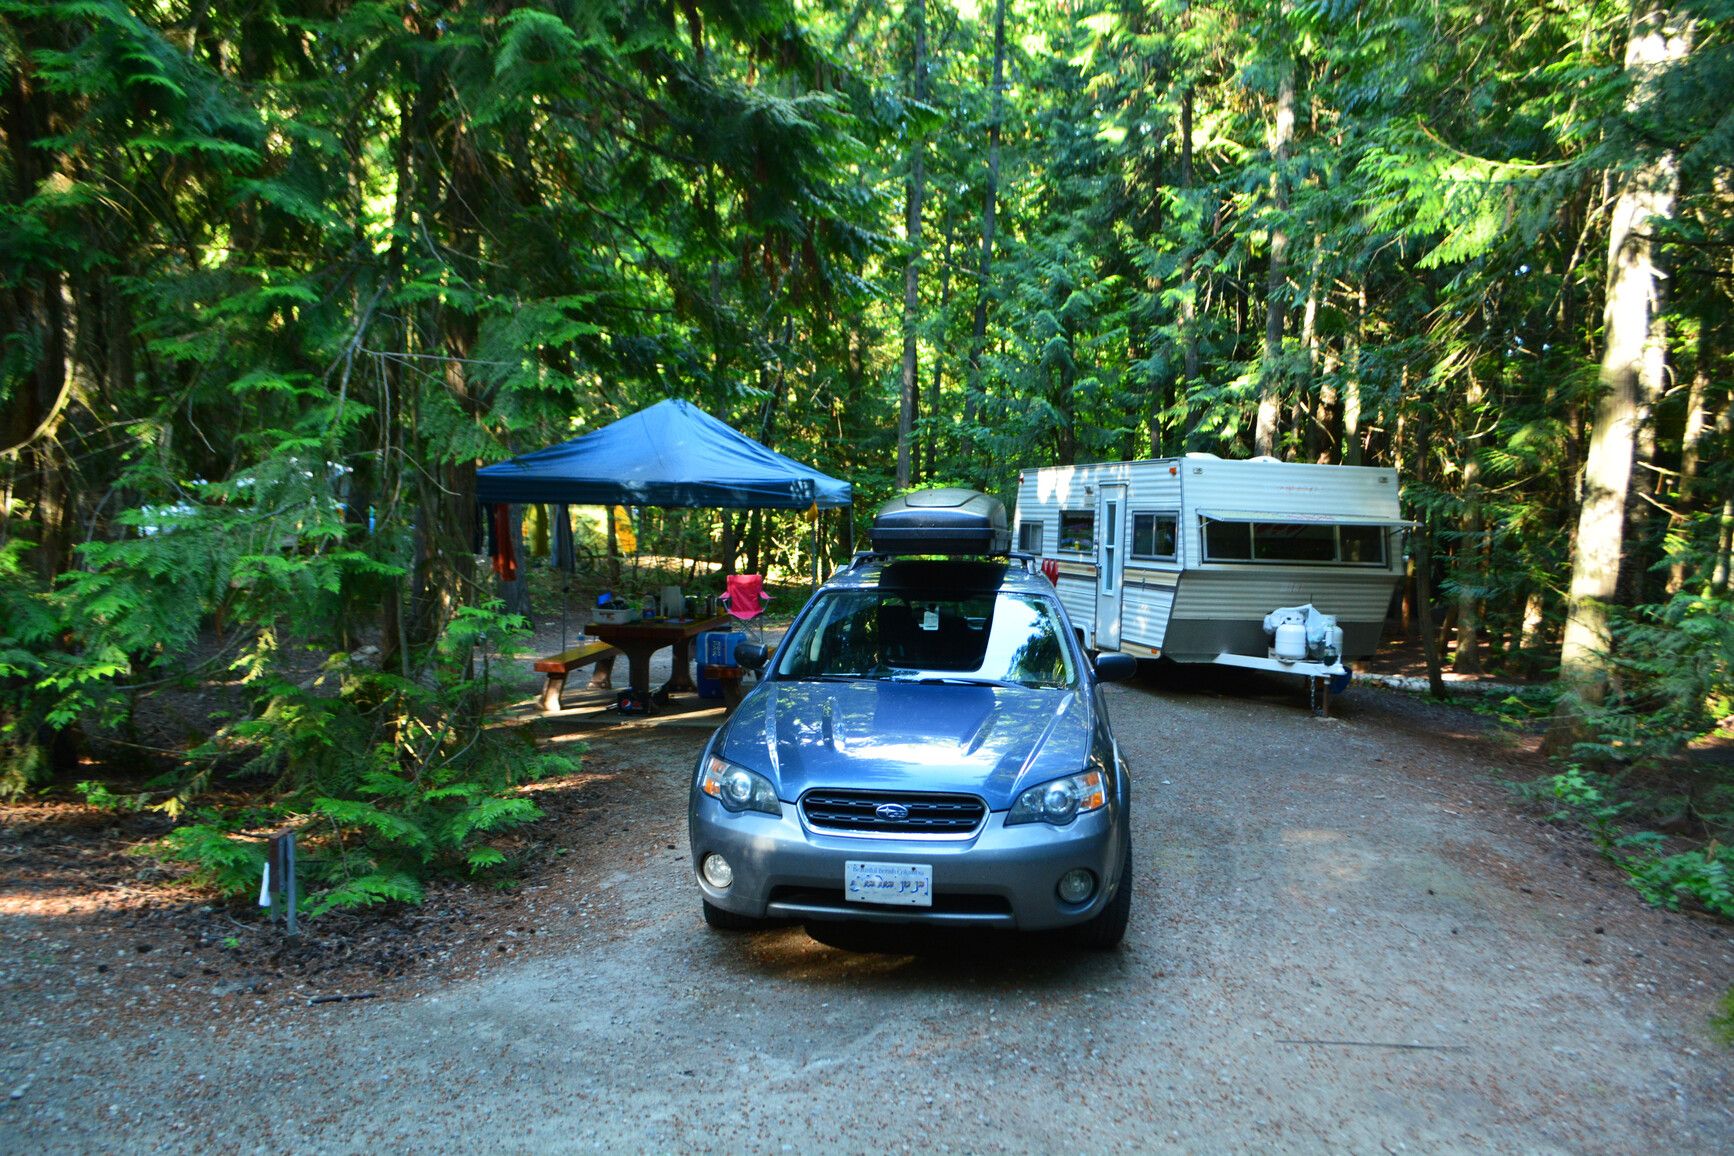 A forested campsite in Herald Park.